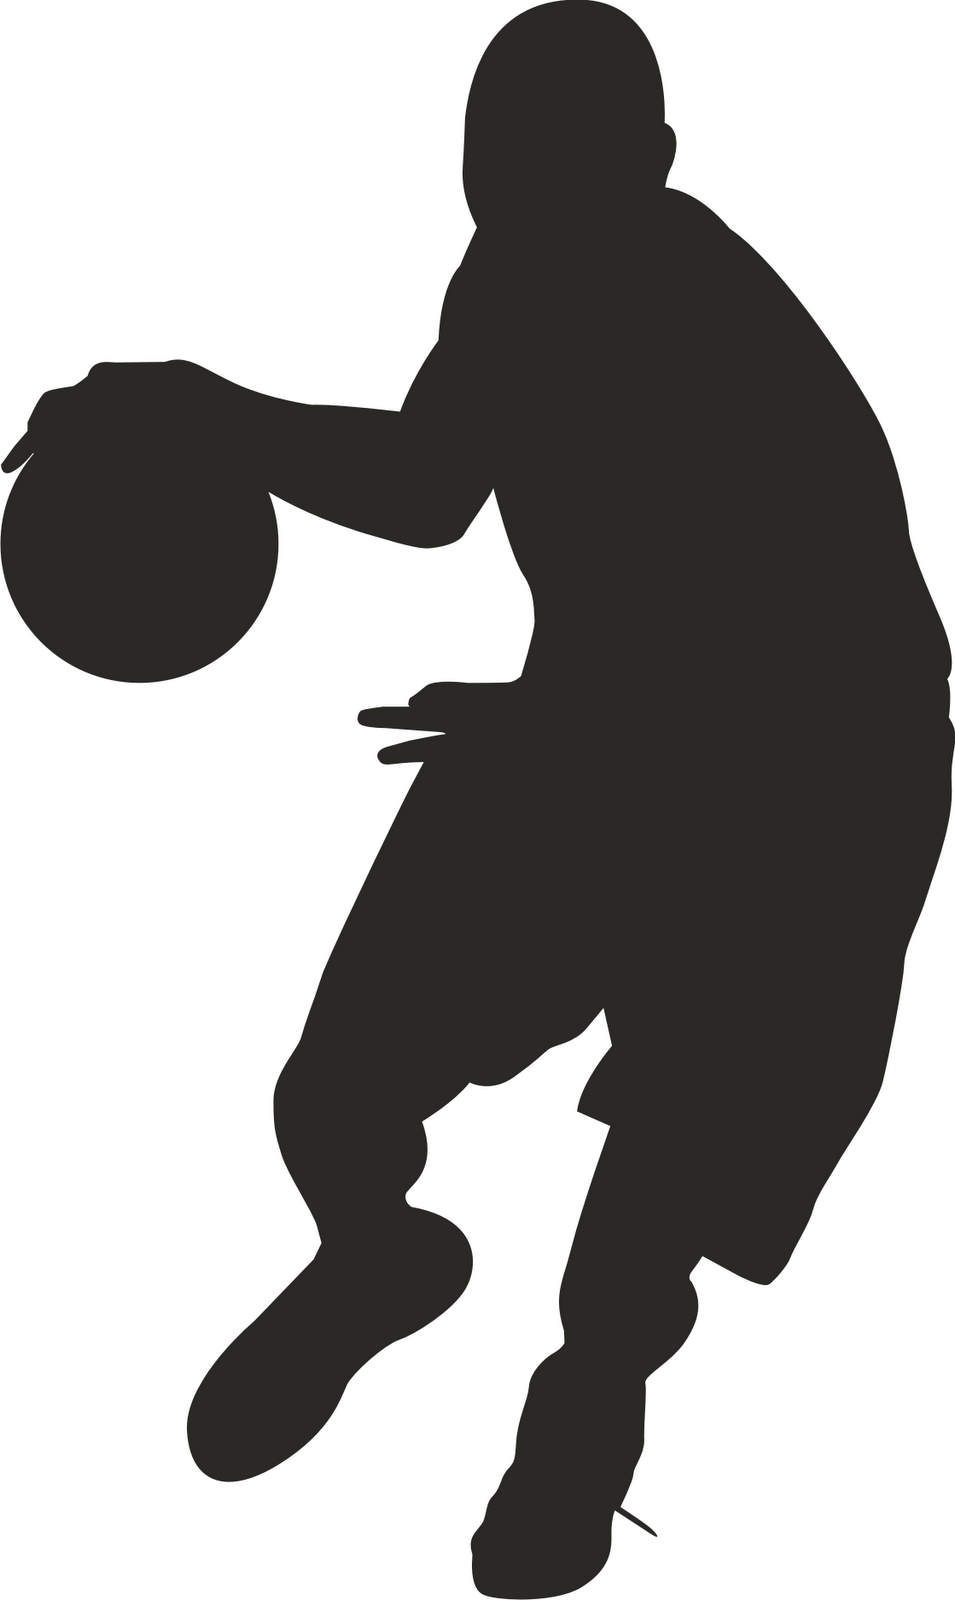 Clipart basketball players.